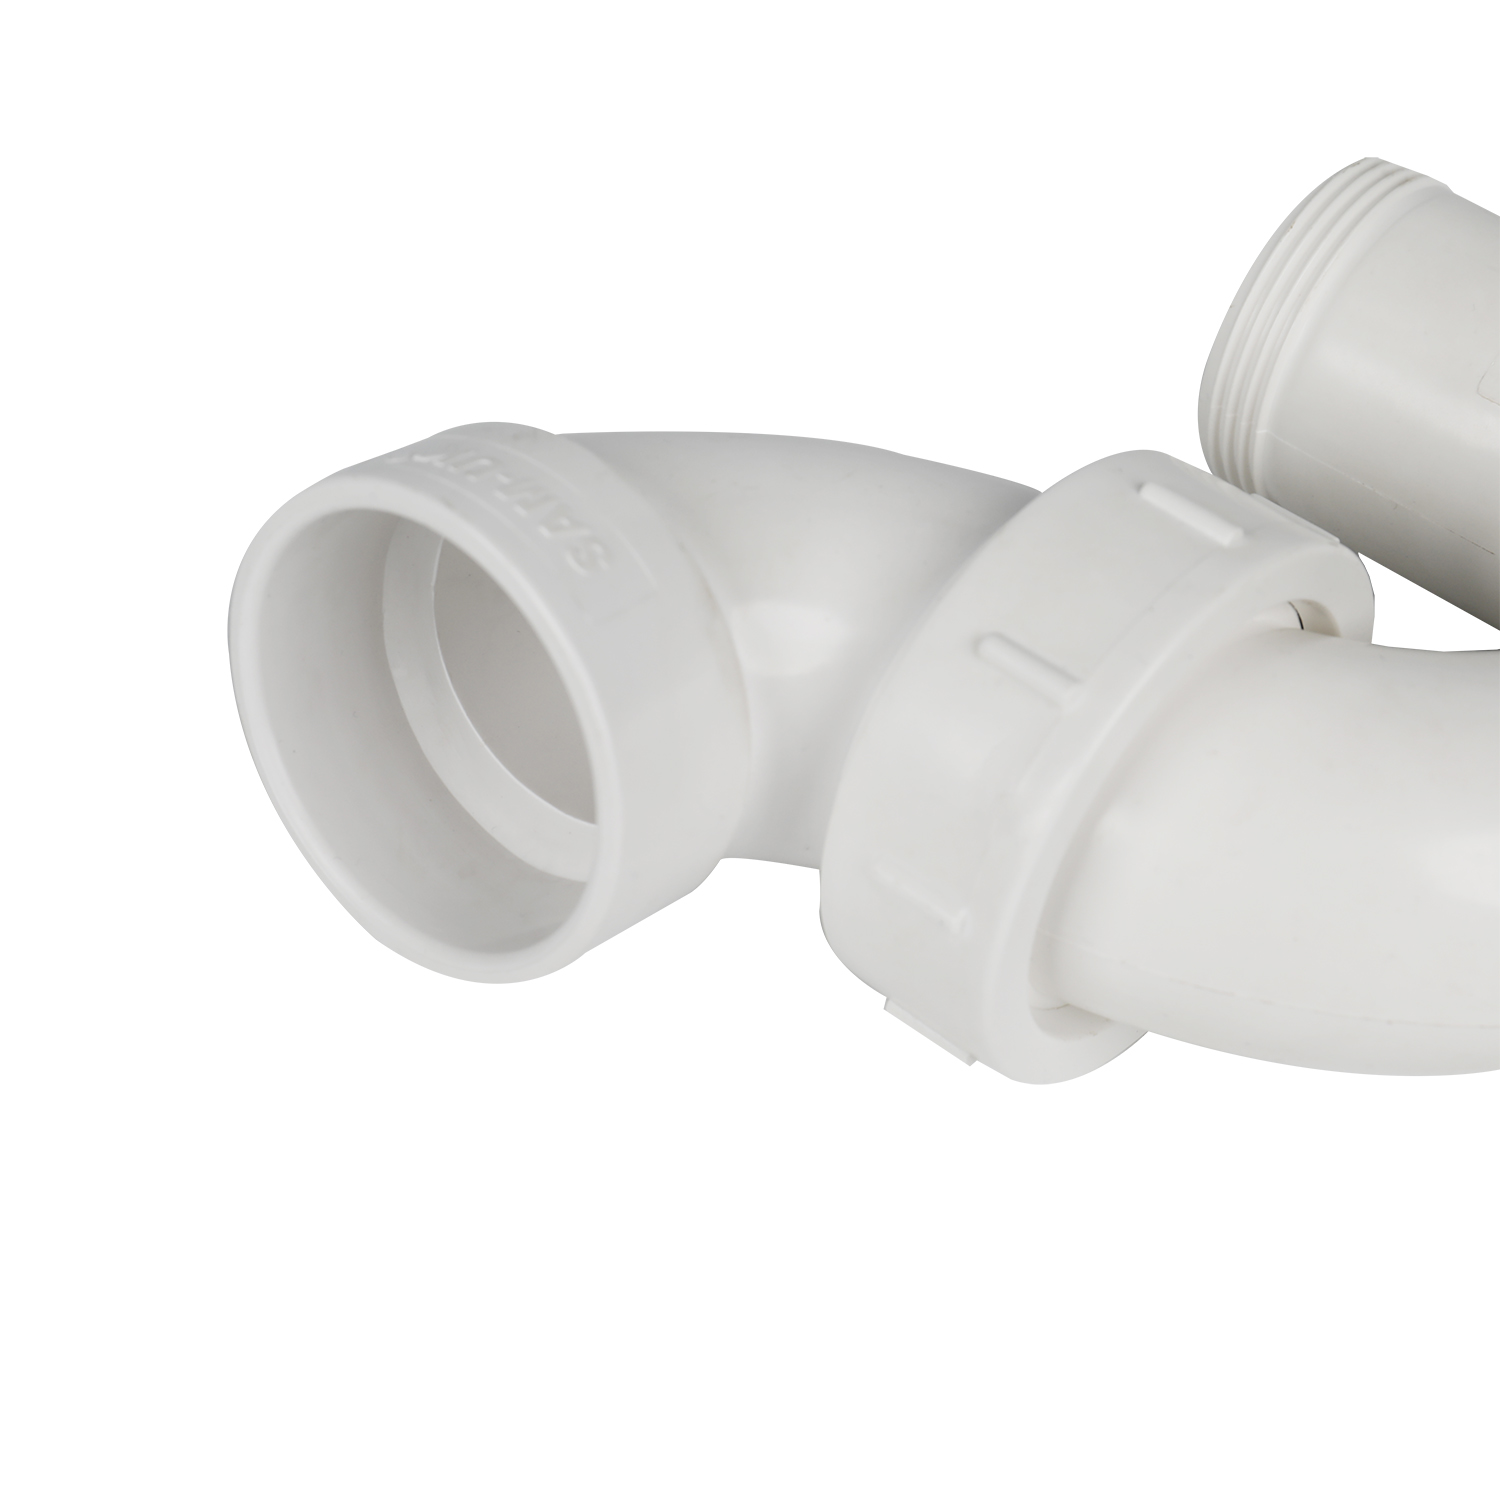 Factory wholesale high quality pvc pipe plumbing fittings manufacturers plastic PVC trap with union fitting